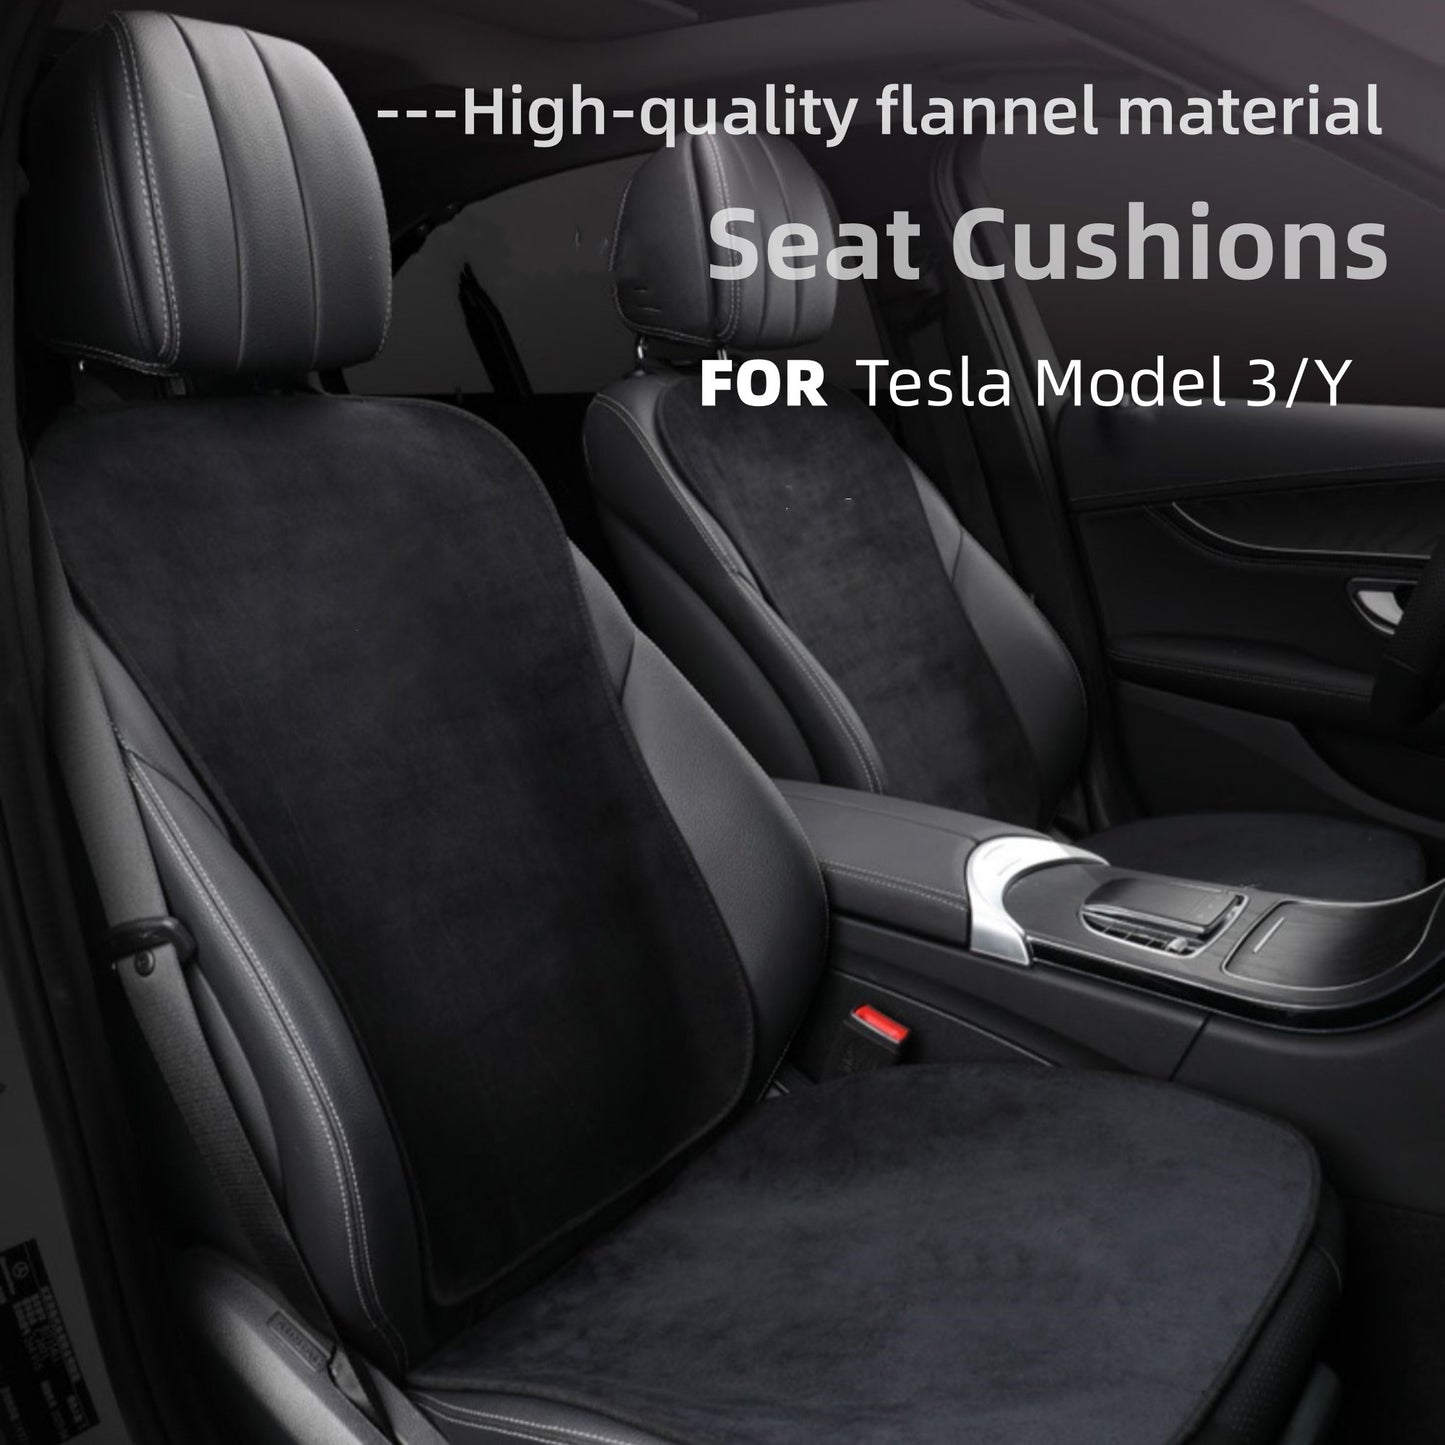 Car Seat Cushion Premium Flannel Fabric Soft and Non-Slip Seat Cover for Tesla Model 3/Y New Model 3 Highland